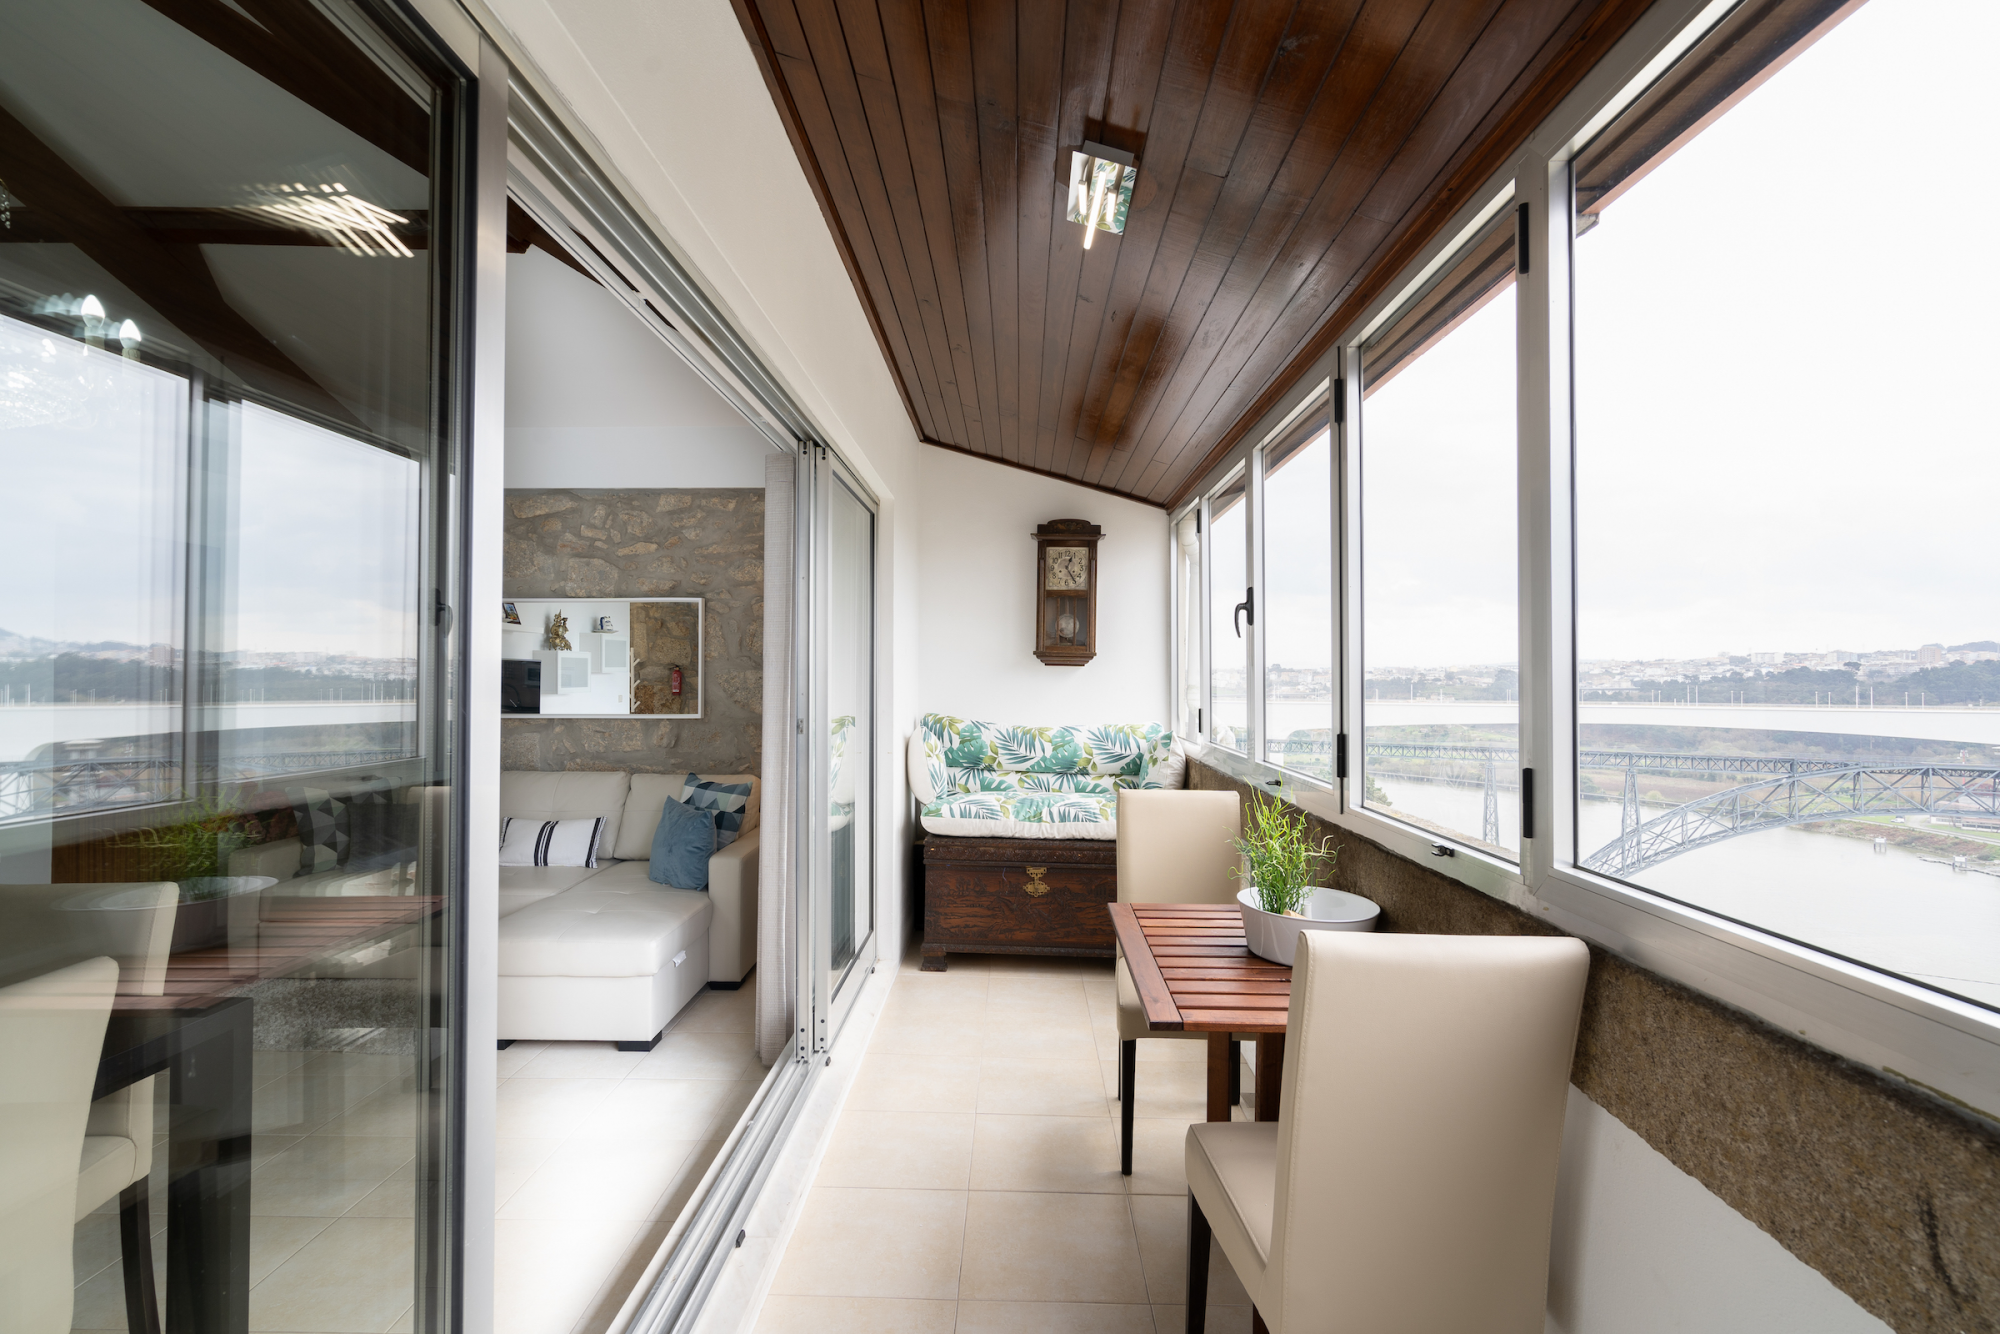 Upscale Flat | Instaworthy River View by Host Wise